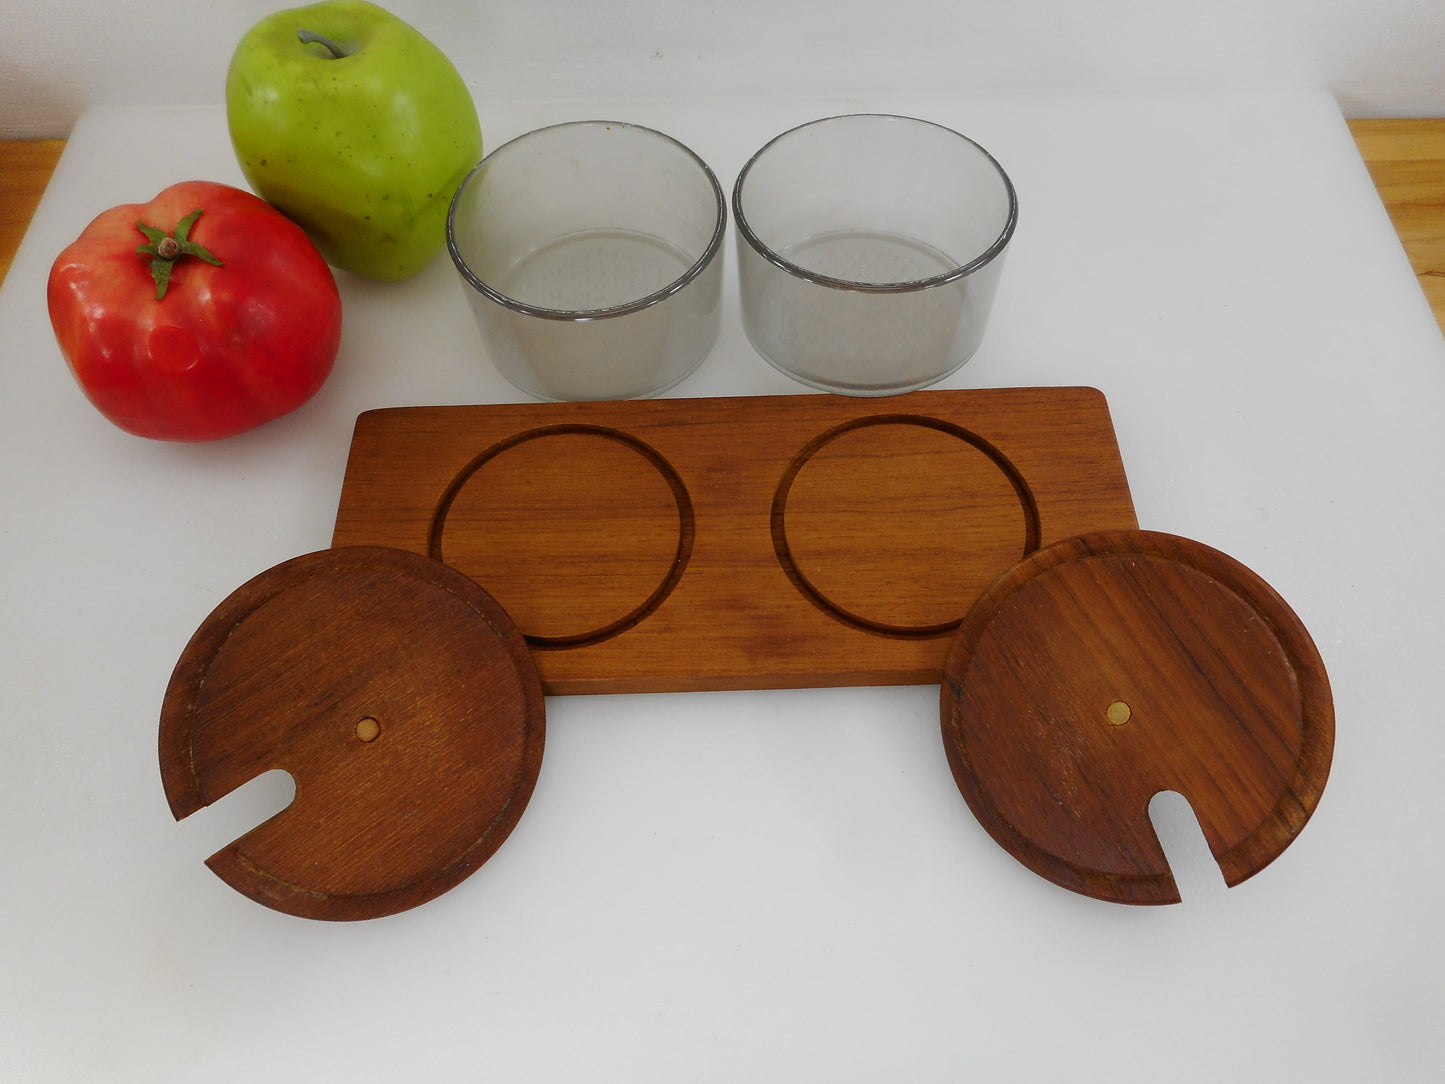 Liithje Denmark Teak Double Dish Condiment Serving Tray - Vintage Danish Modern Used